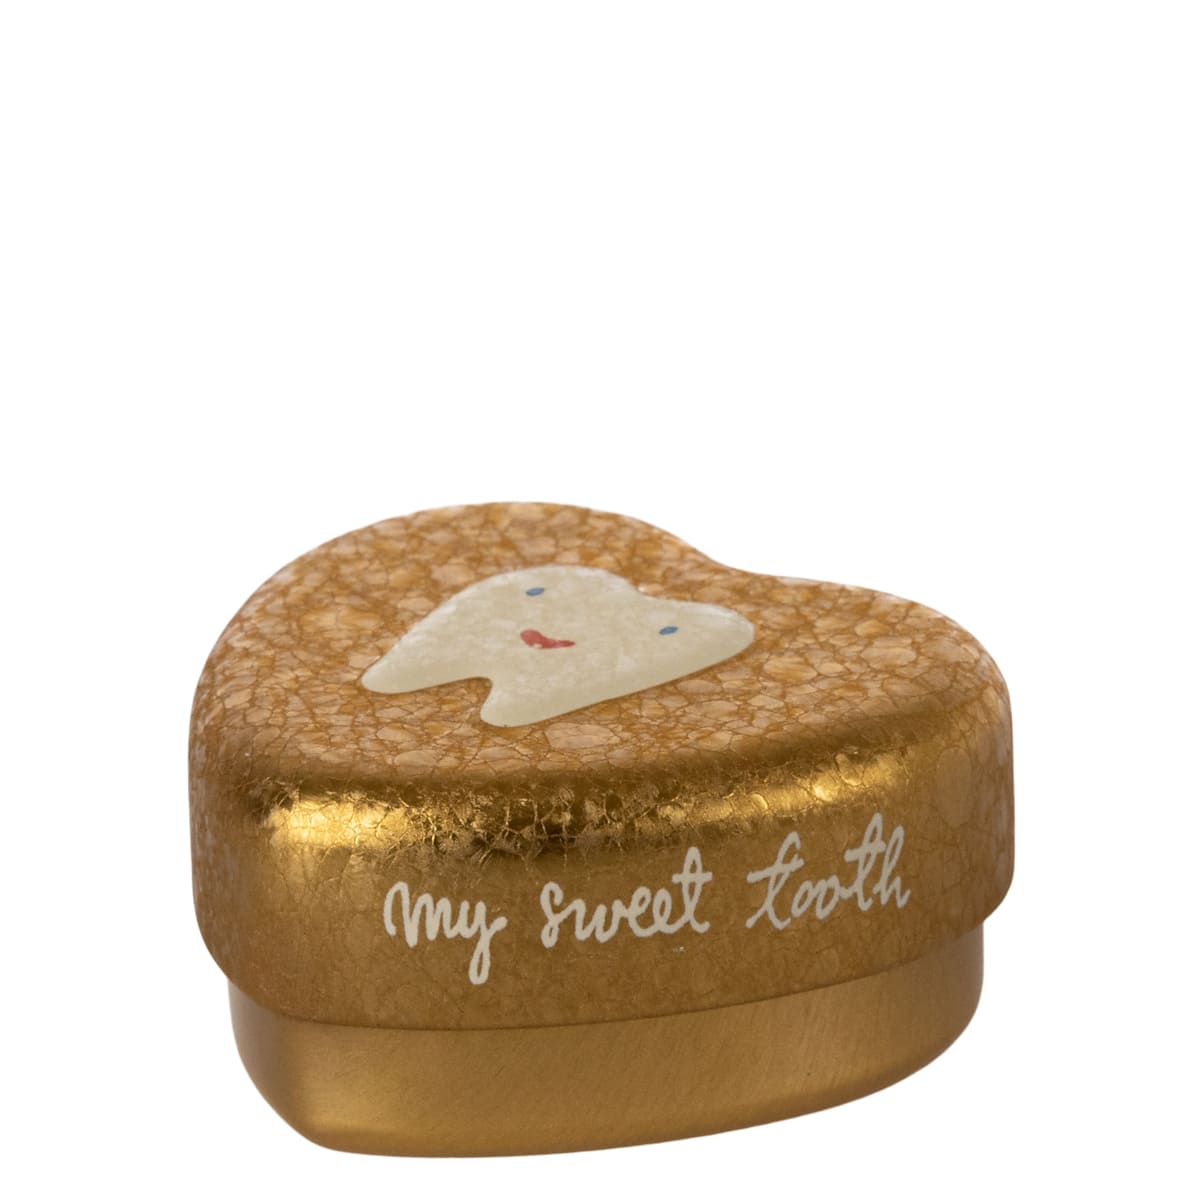 Maileg Tooth Box Gold